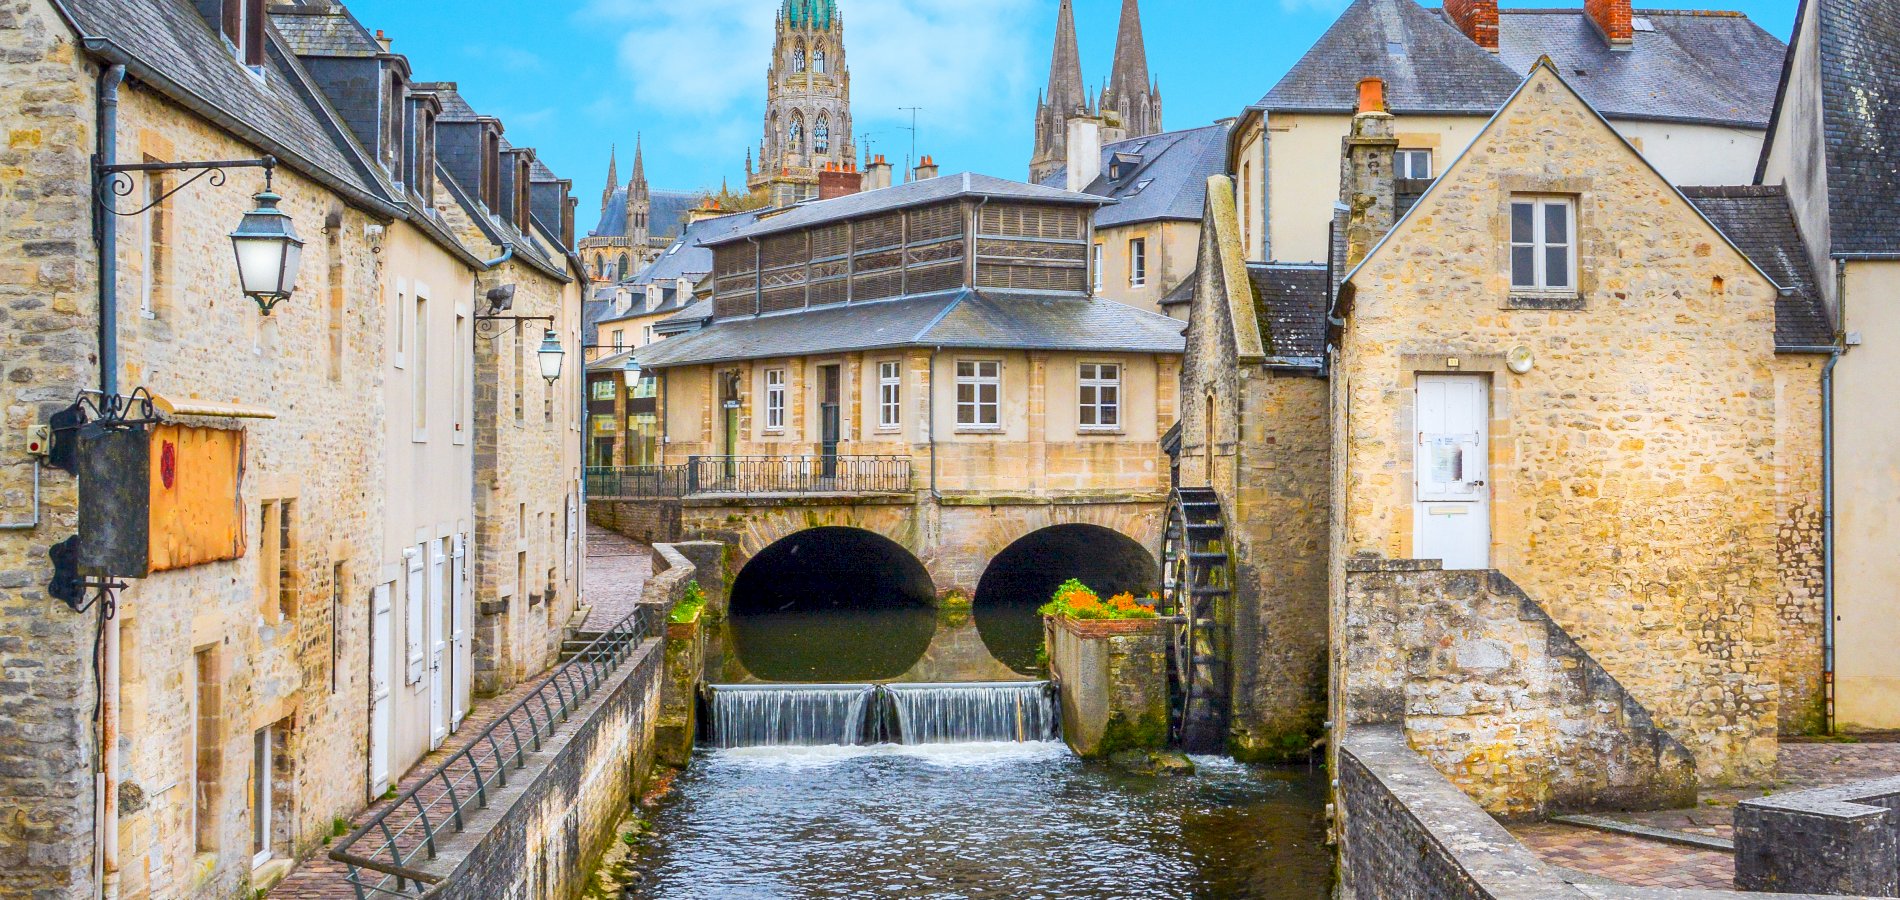 Ophorus Tours - 4 Days Normandy Private Travel Package - Based in Bayeux